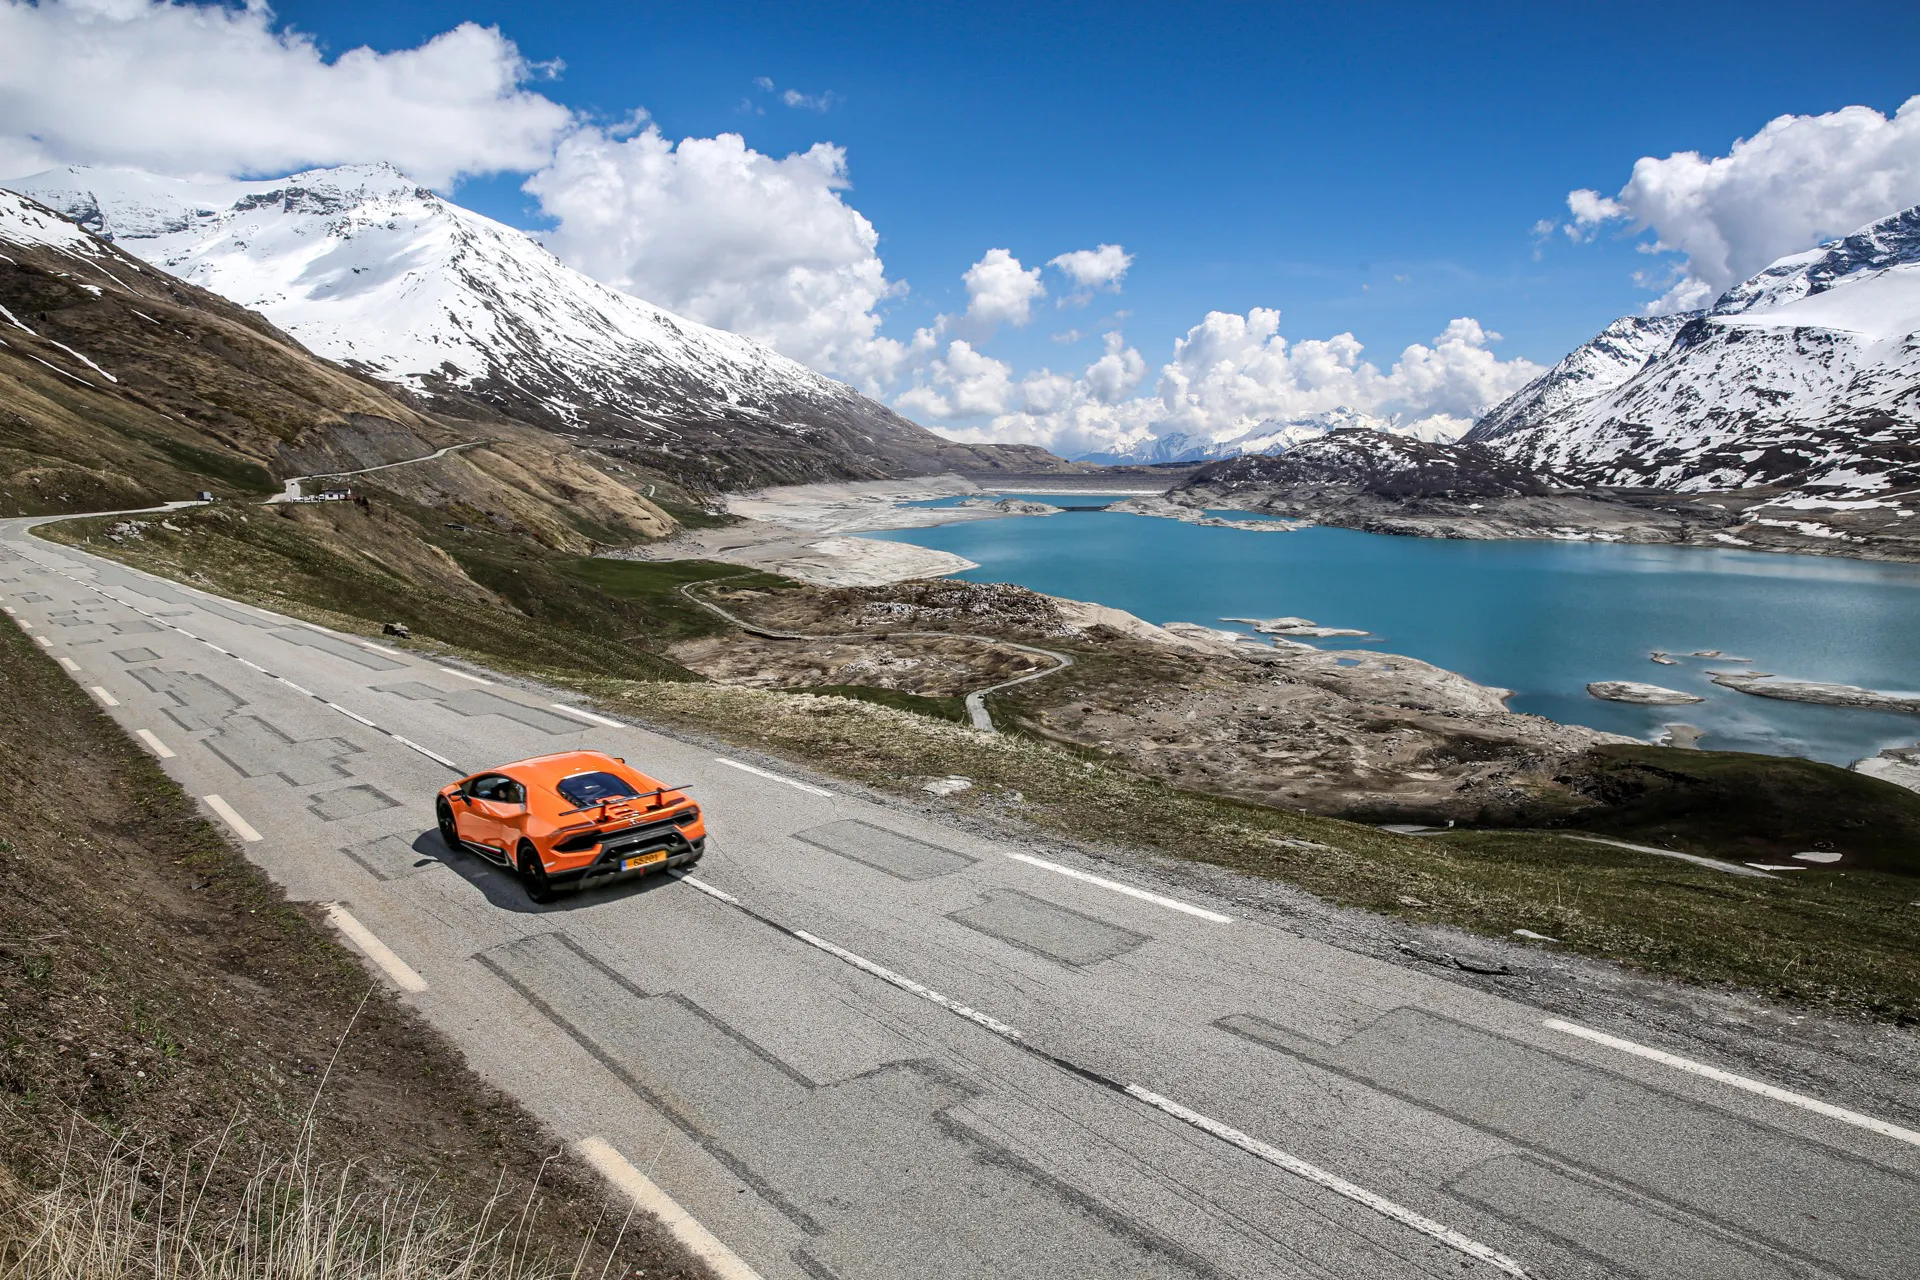 Drive a selection of Supercars in Switzerland